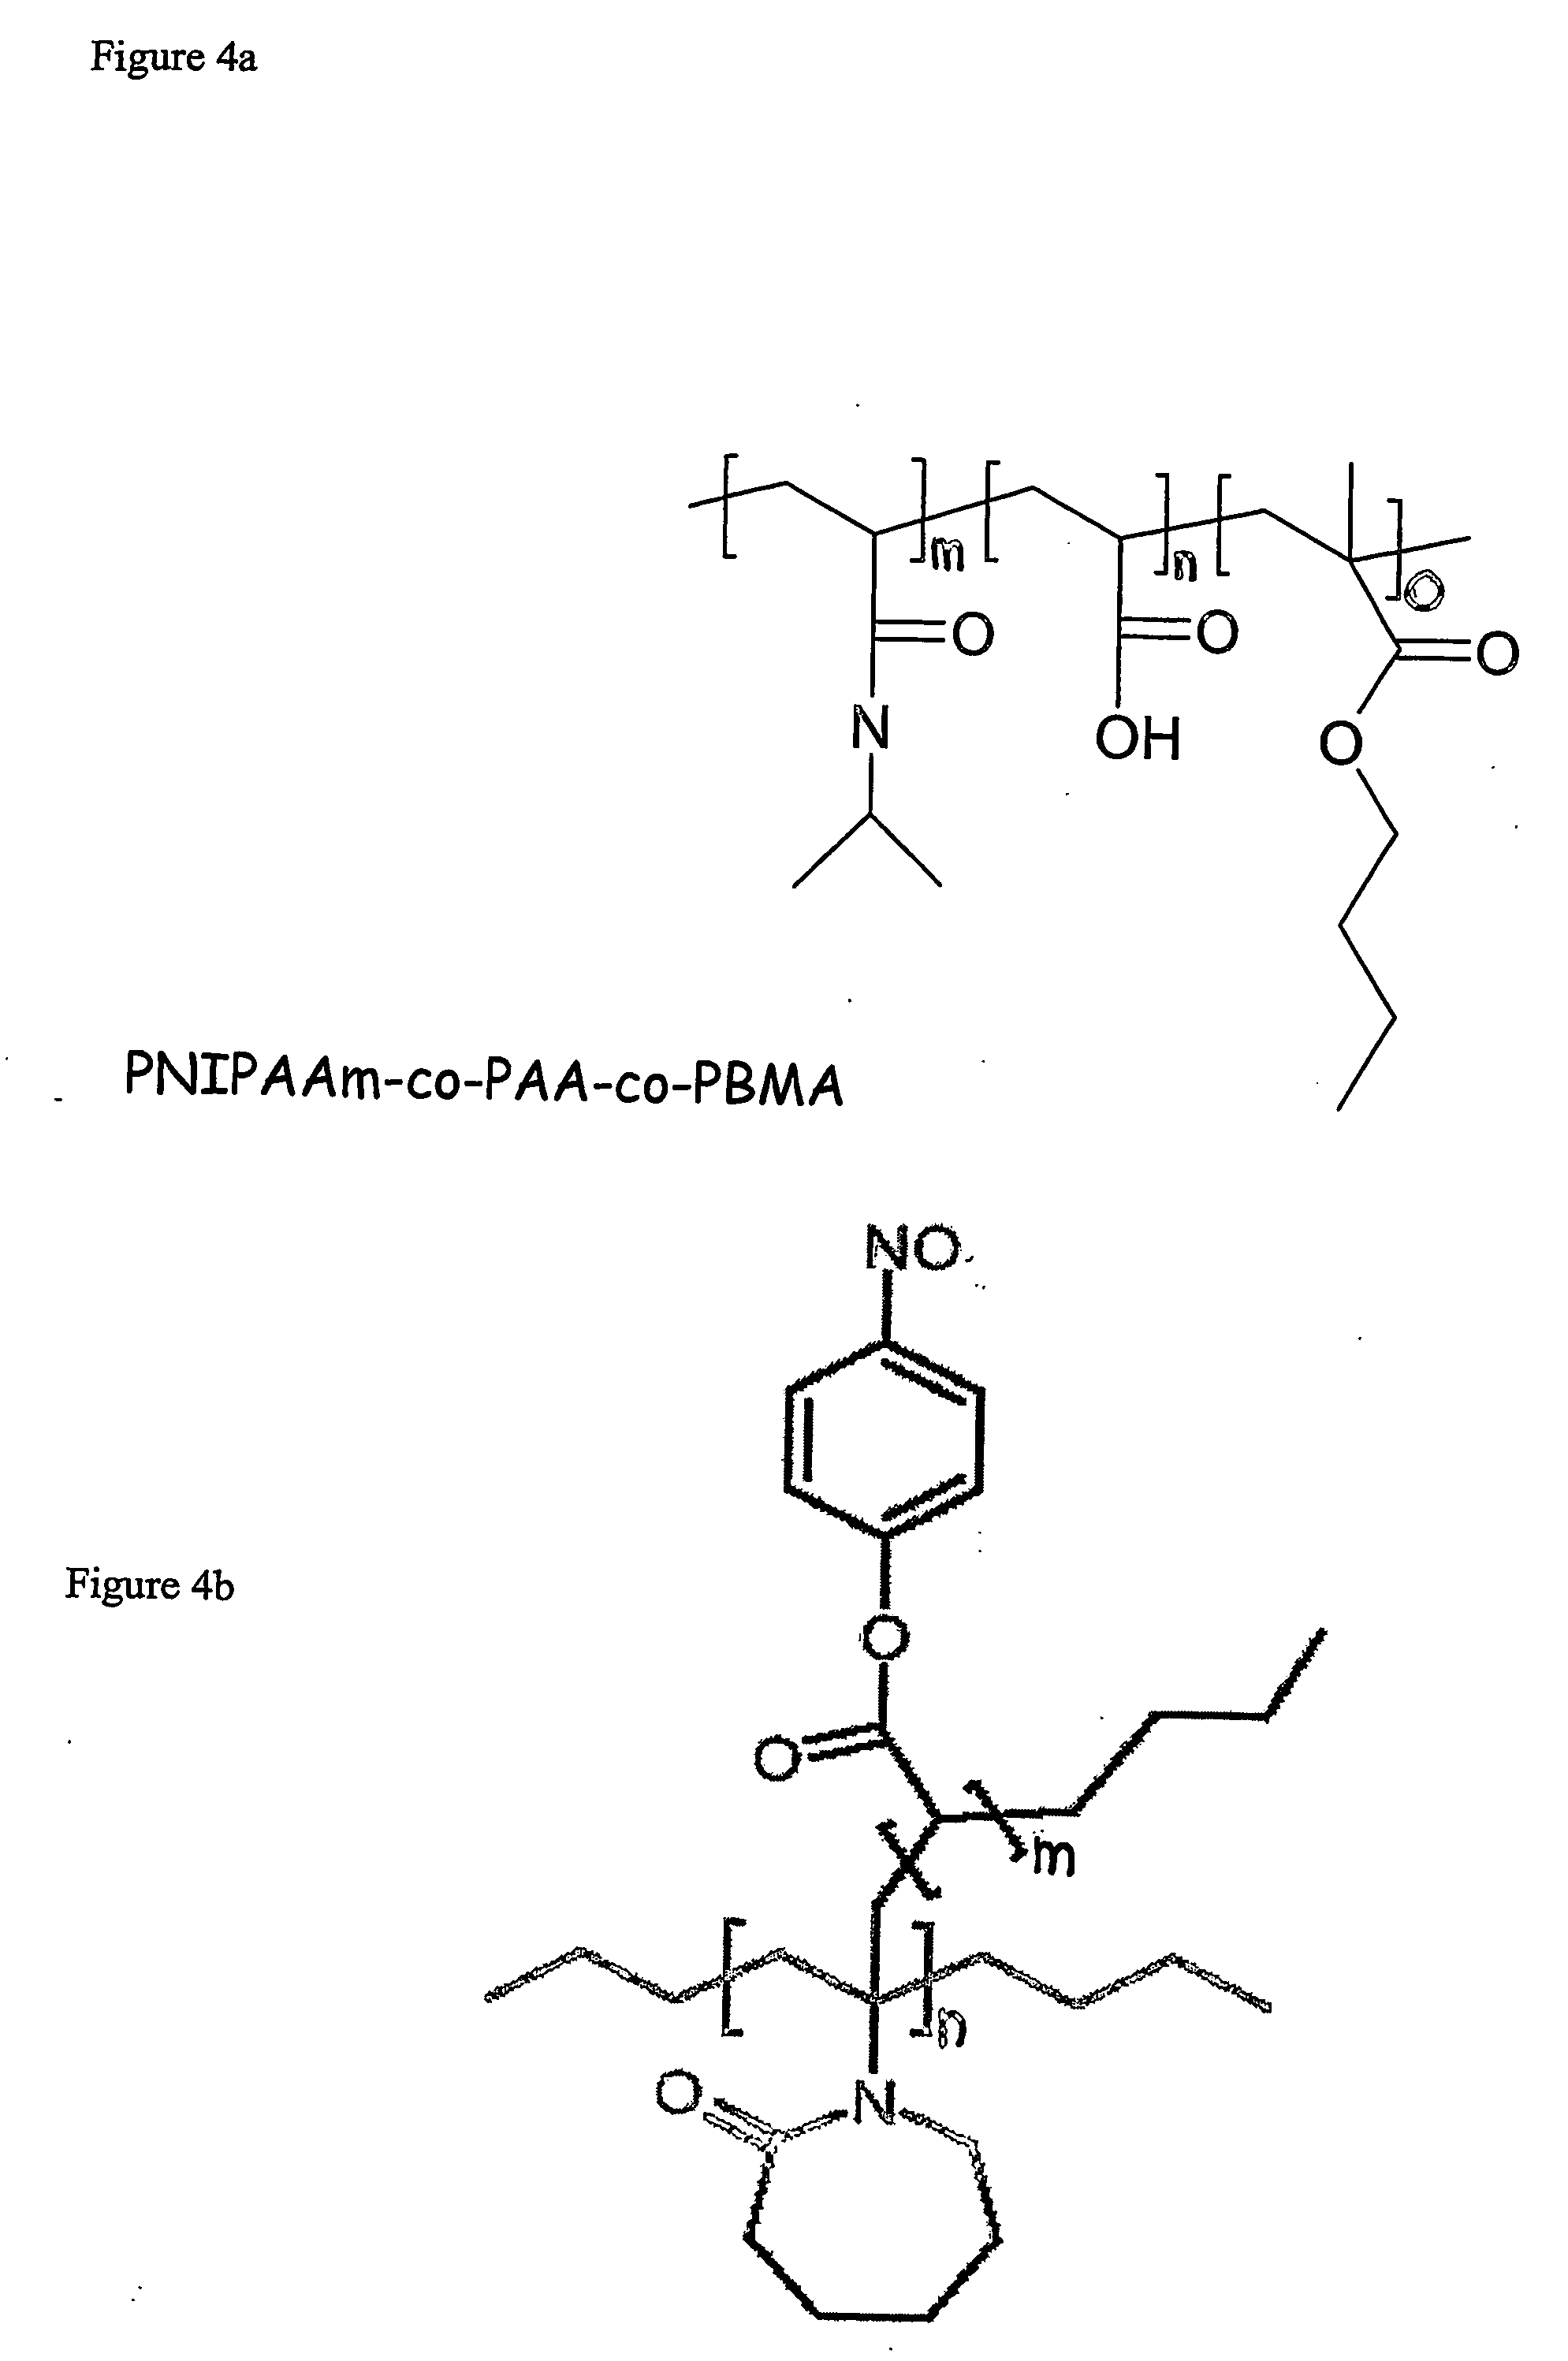 Use of ph-responsive polymers